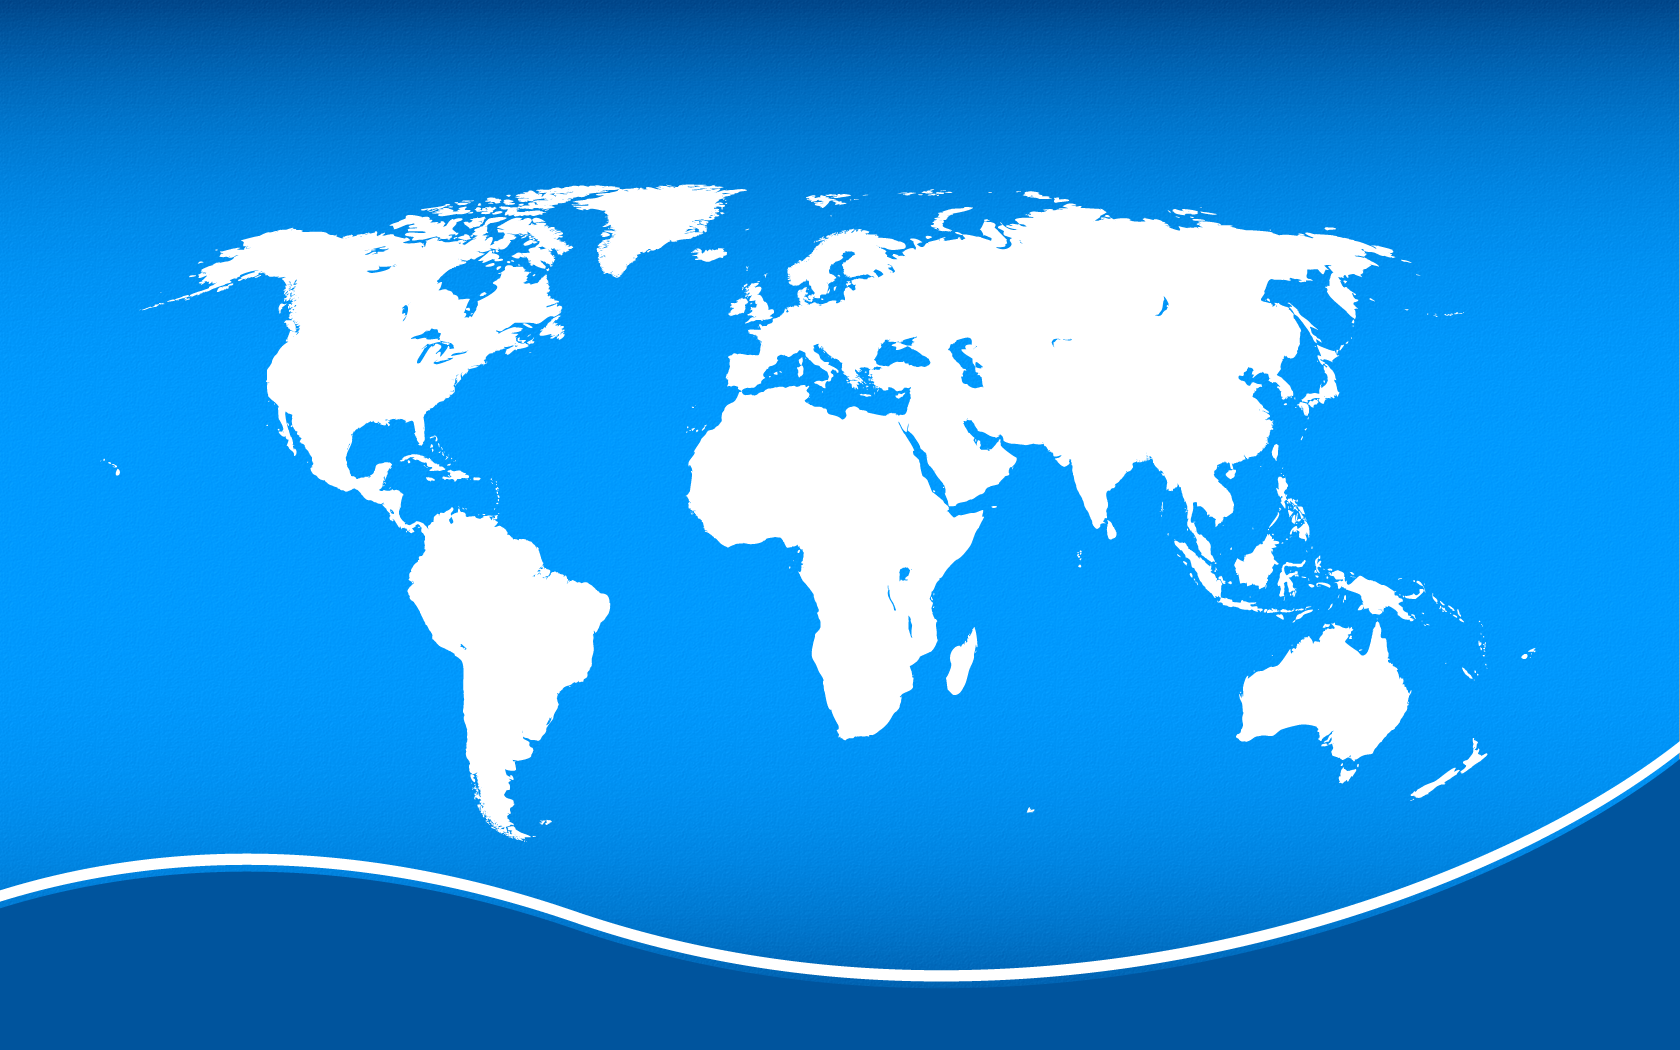 world-map-vector-background-1410